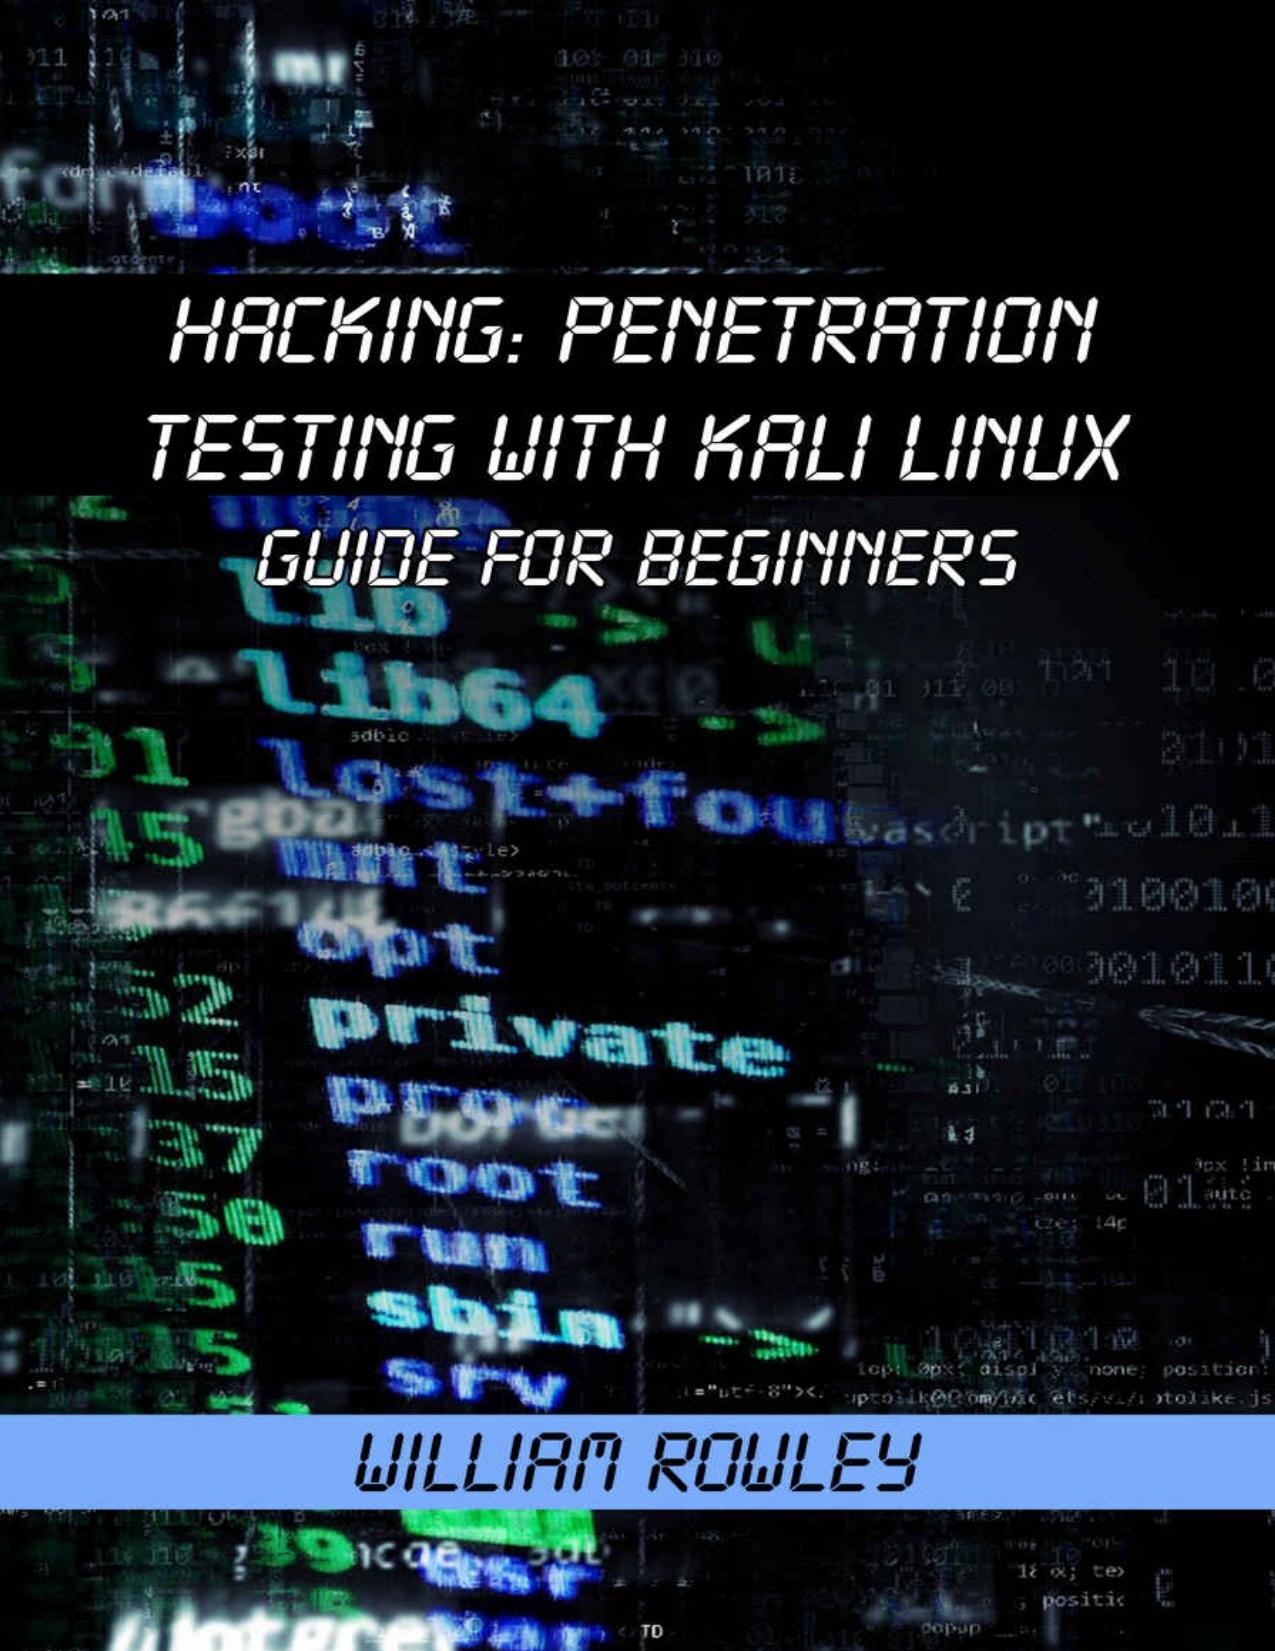 Hacking: Penetration Testing with Kali Linux: Guide for Beginners by William Rowley